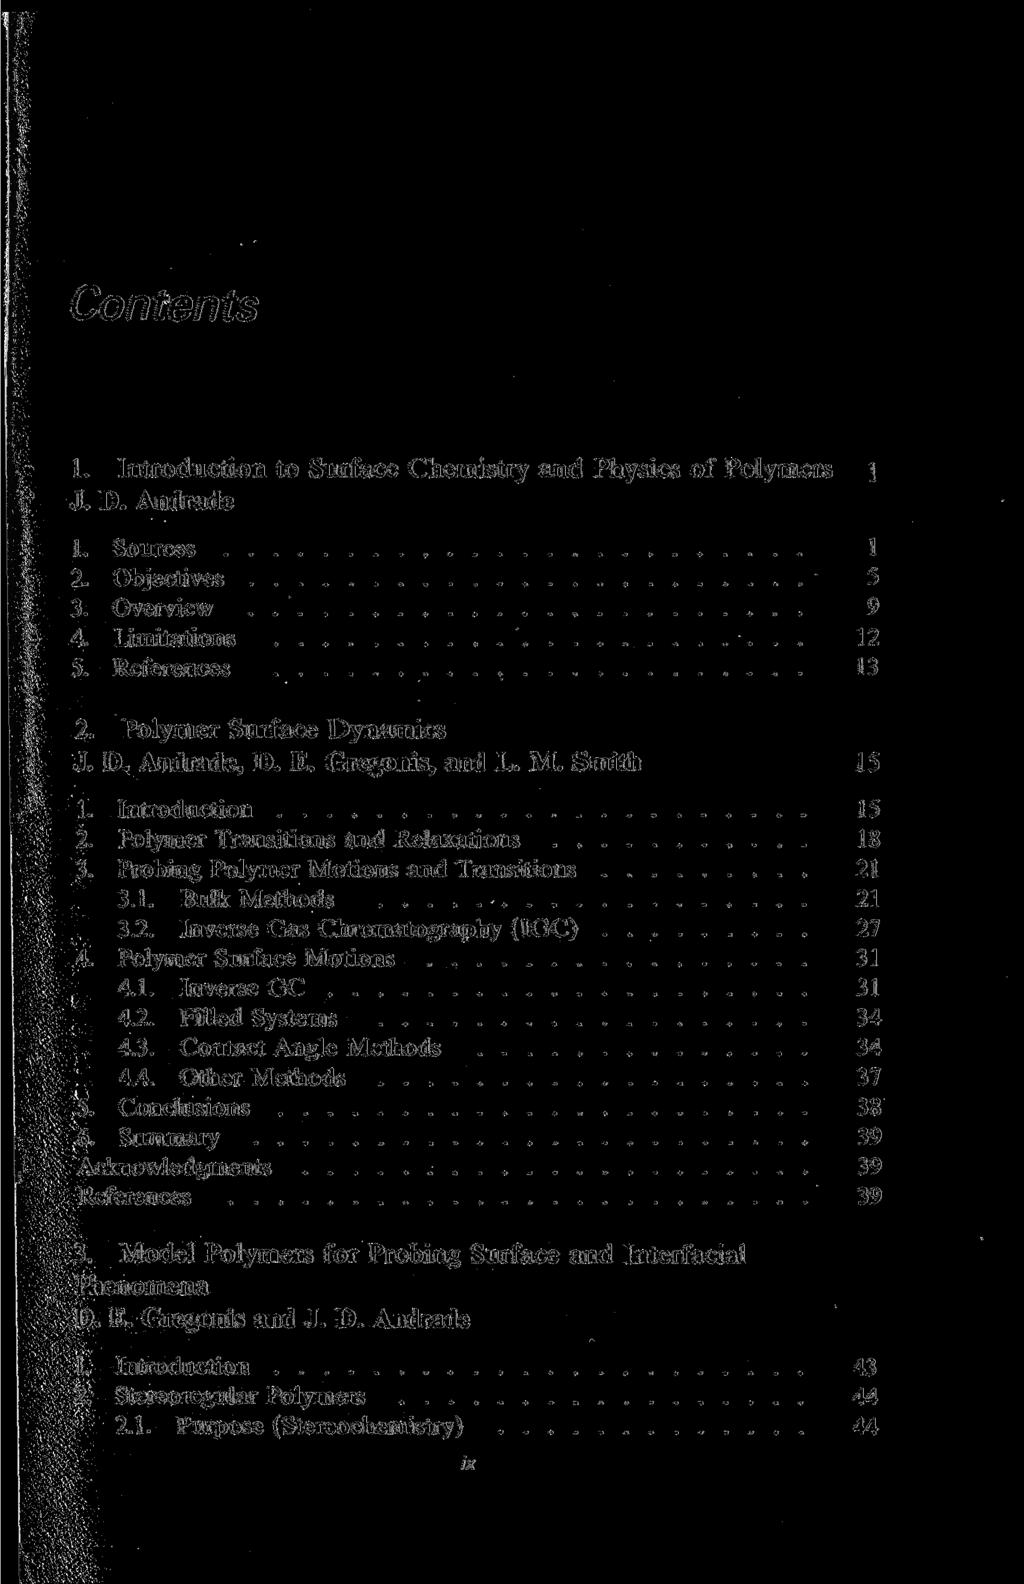 Contents 1. Introduction to Surface Chemistry and Physics of Polymers 1 J. D. Andrade 1. Sources 1 2. Objectives 5 3. Overview 9 4. Limitations 12 5. References 13 2. Polymer Surface Dynamics J. D. Andrade, D.